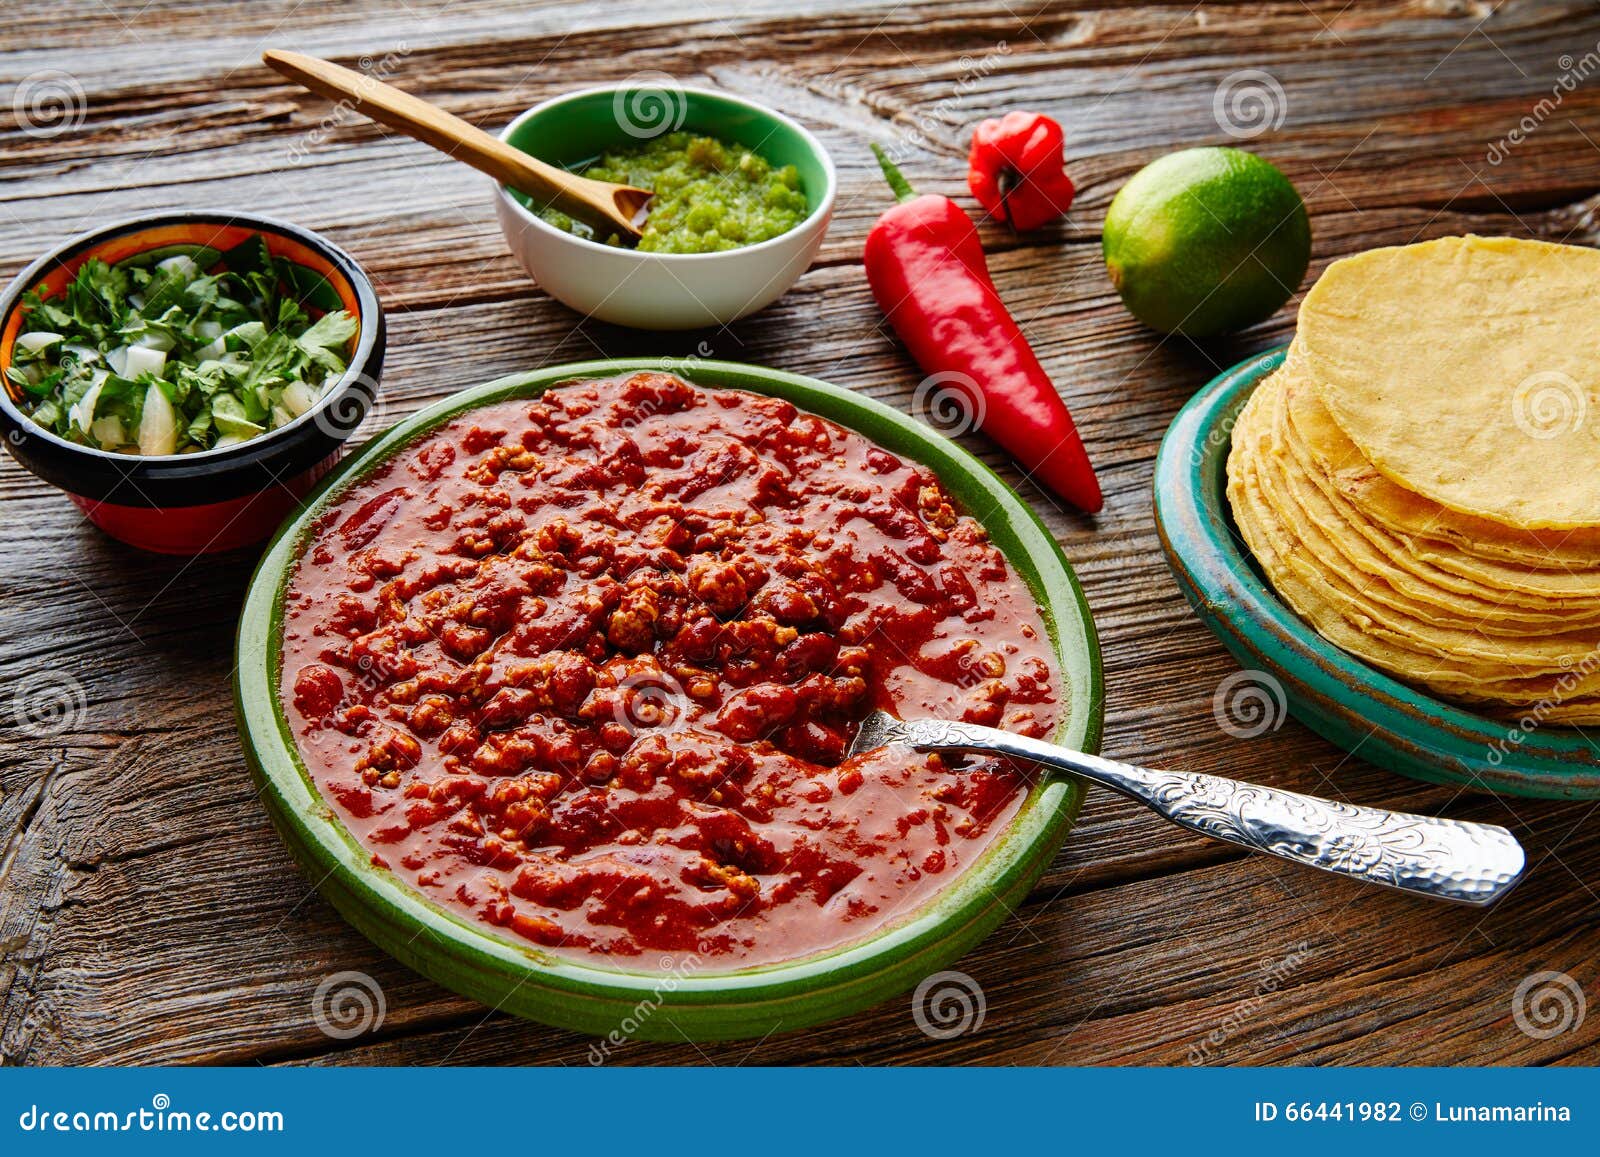 chili with meat platillo mexican food